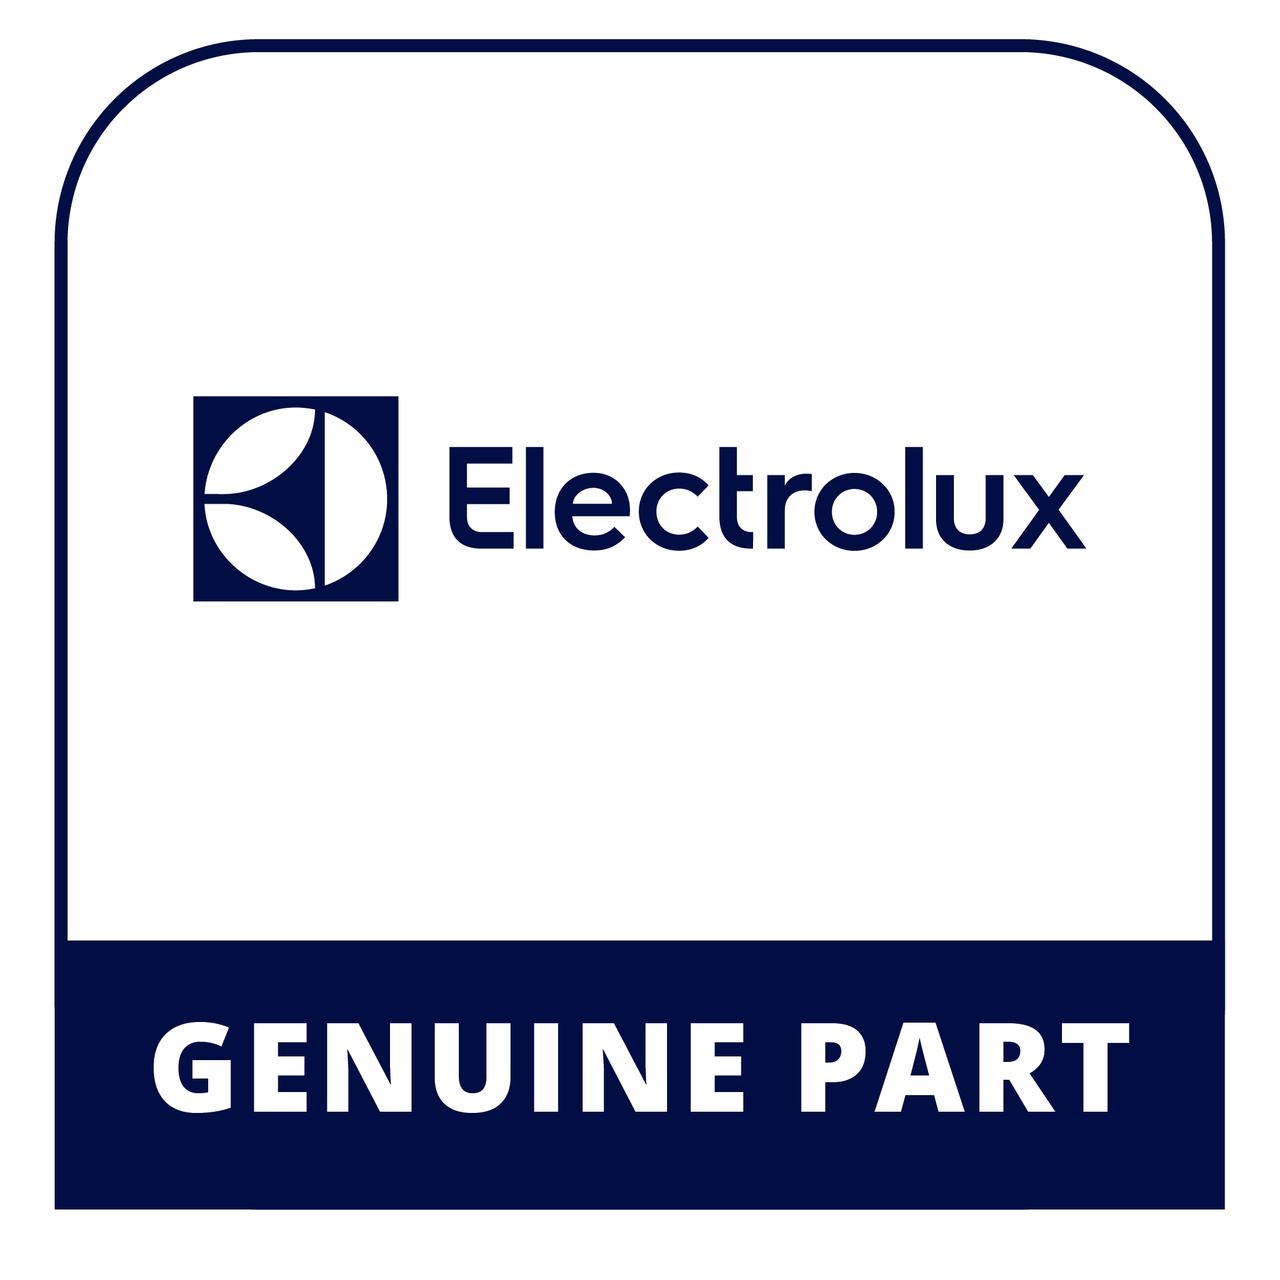 Frigidaire - Electrolux 316417280 Owners Manual - Genuine Electrolux Part